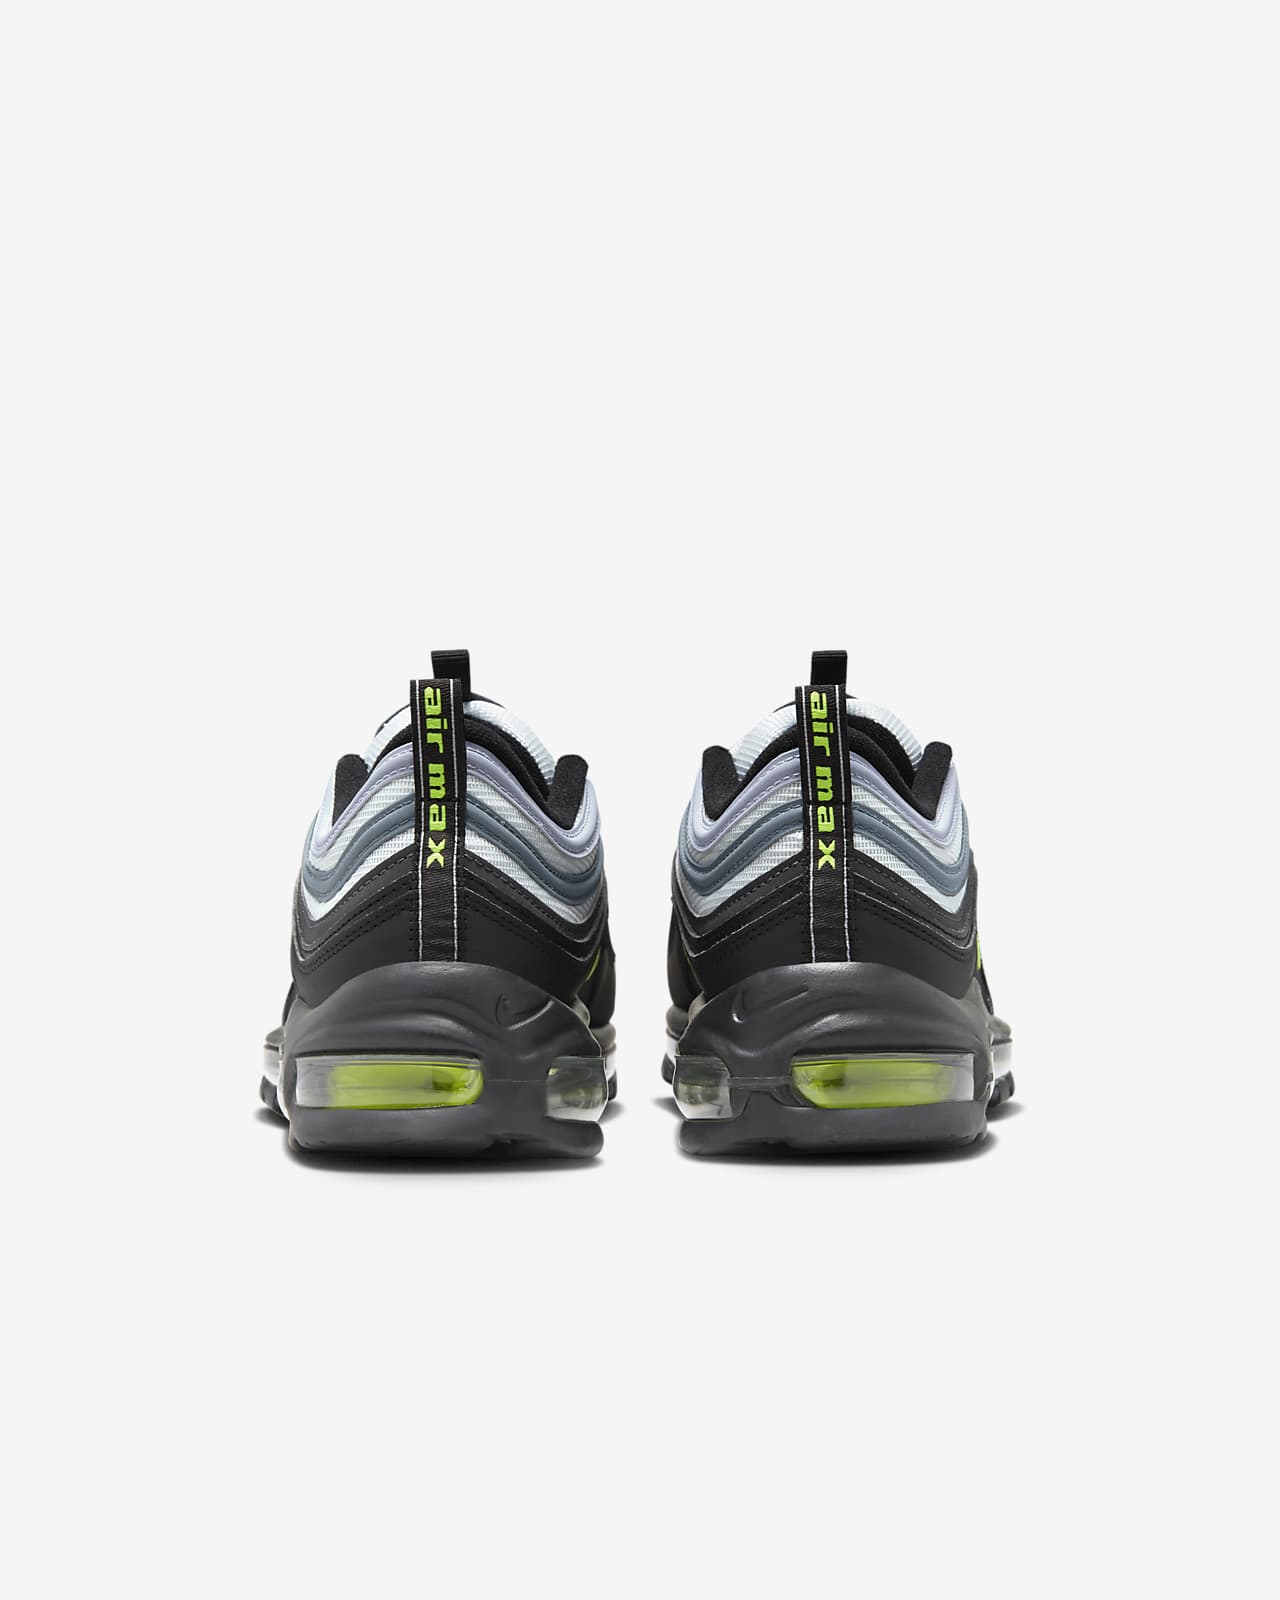 Nike Max Men's Shoes. ID